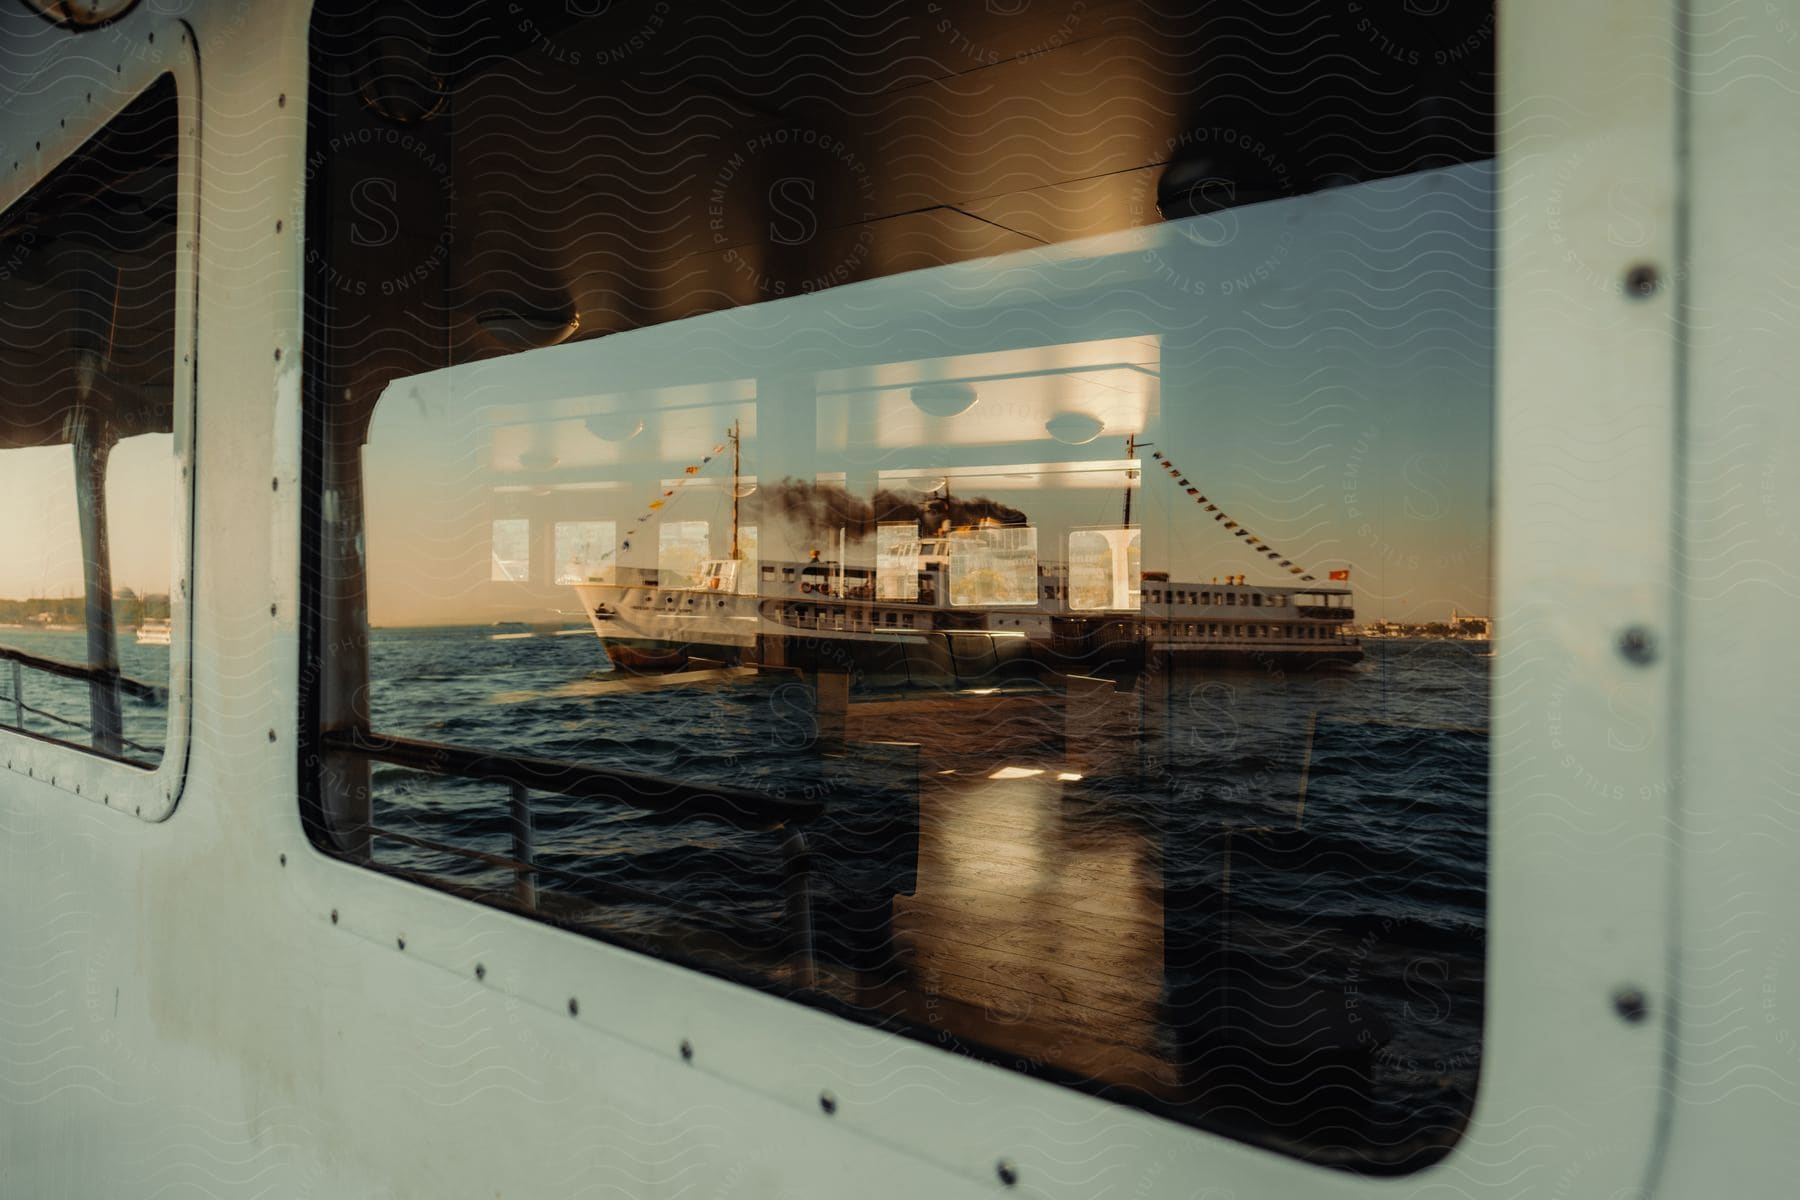 A boat appears reflected in the window of another boat, at dawn or dusk.